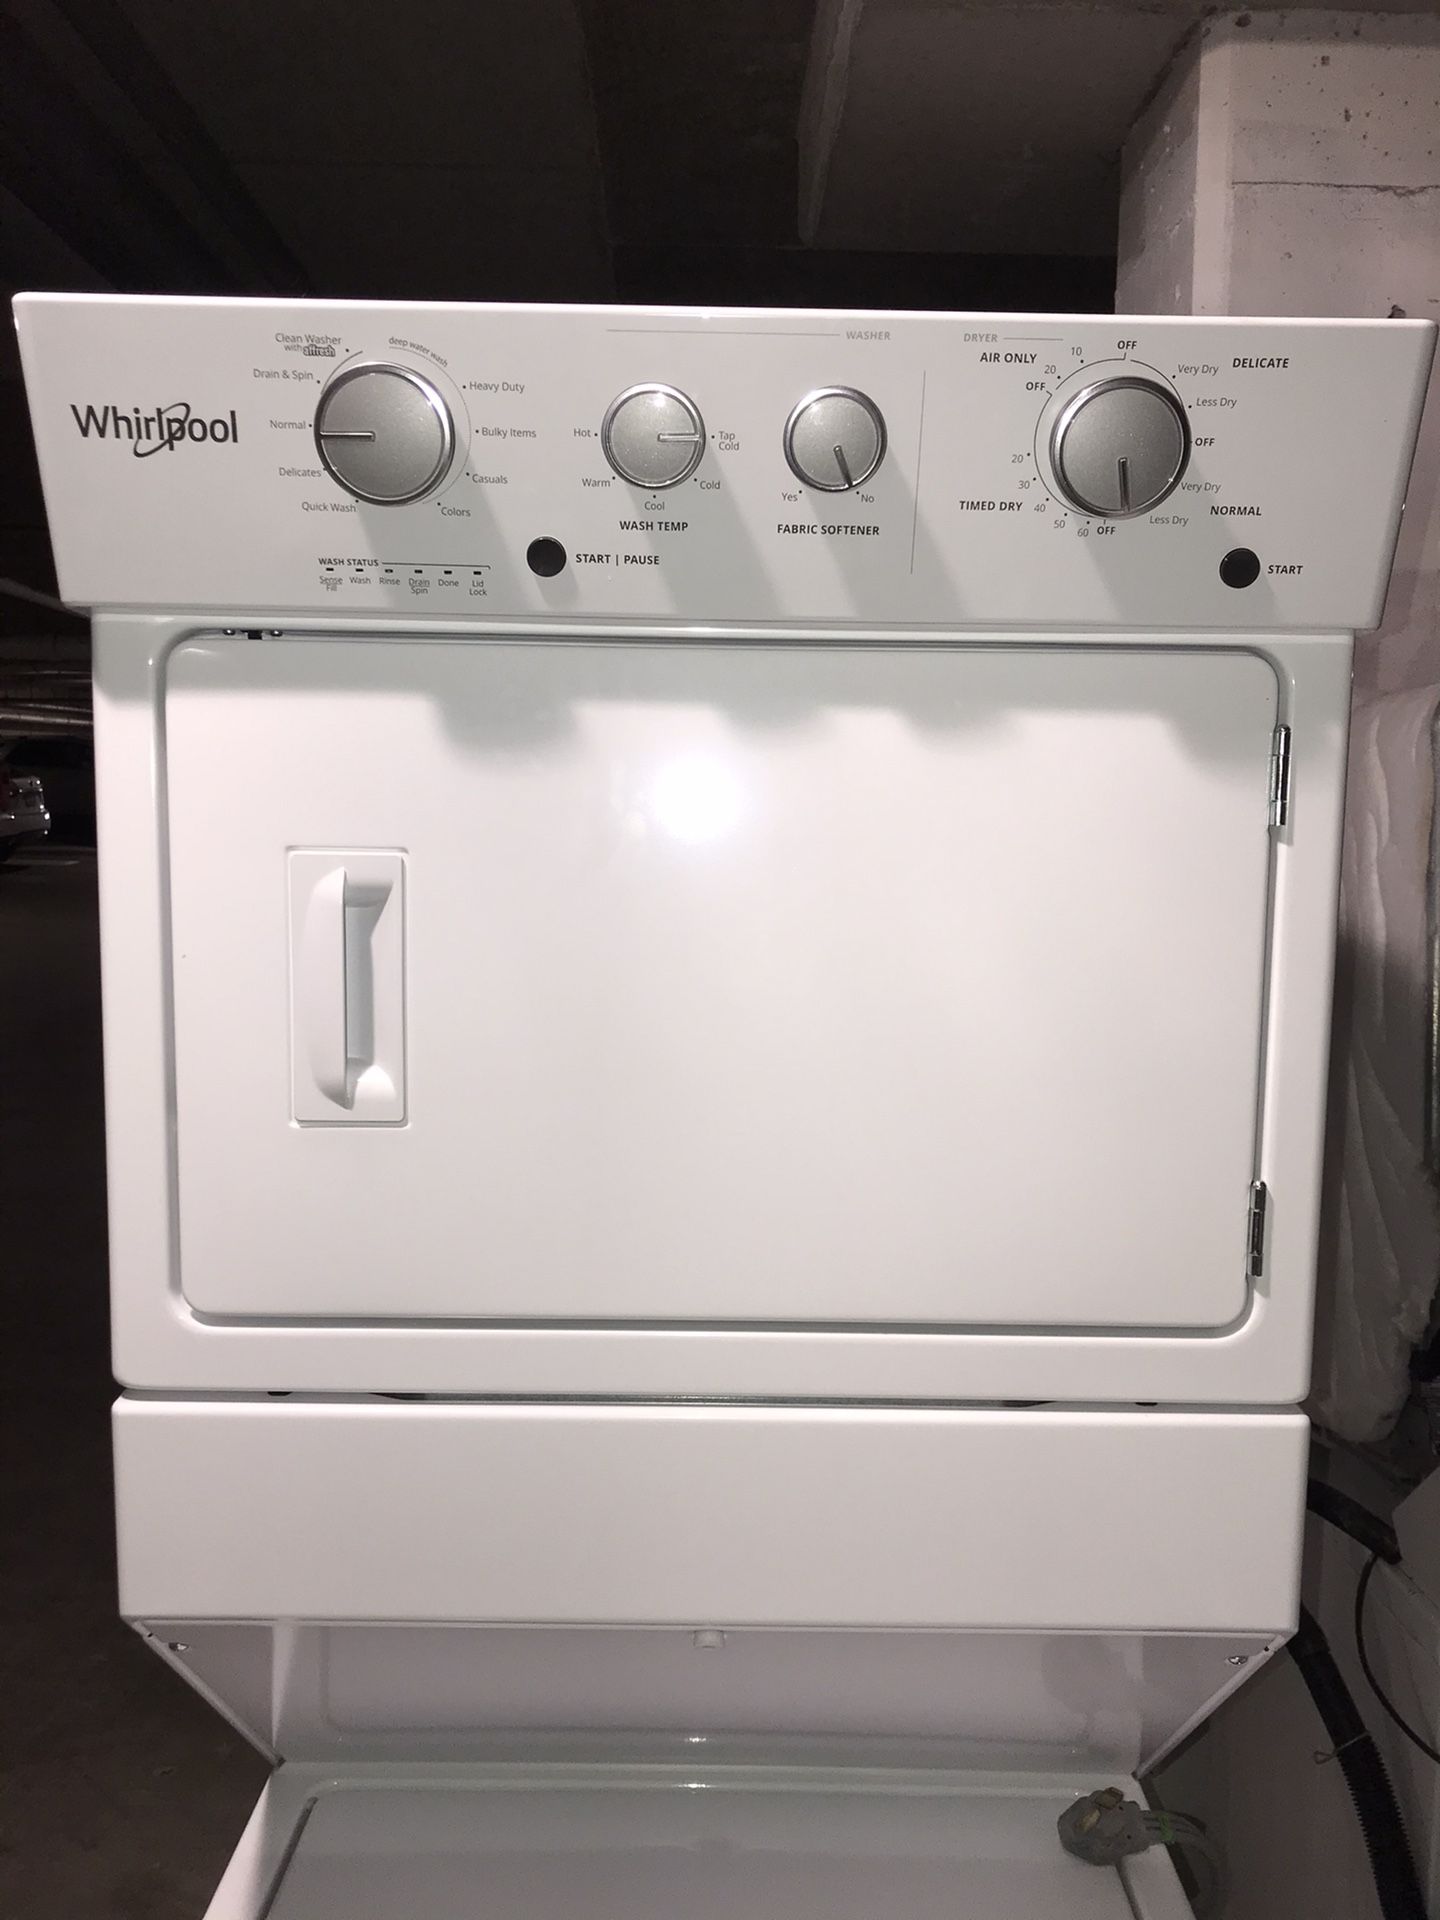 Stackable washer dryer whirlpool 1yr old